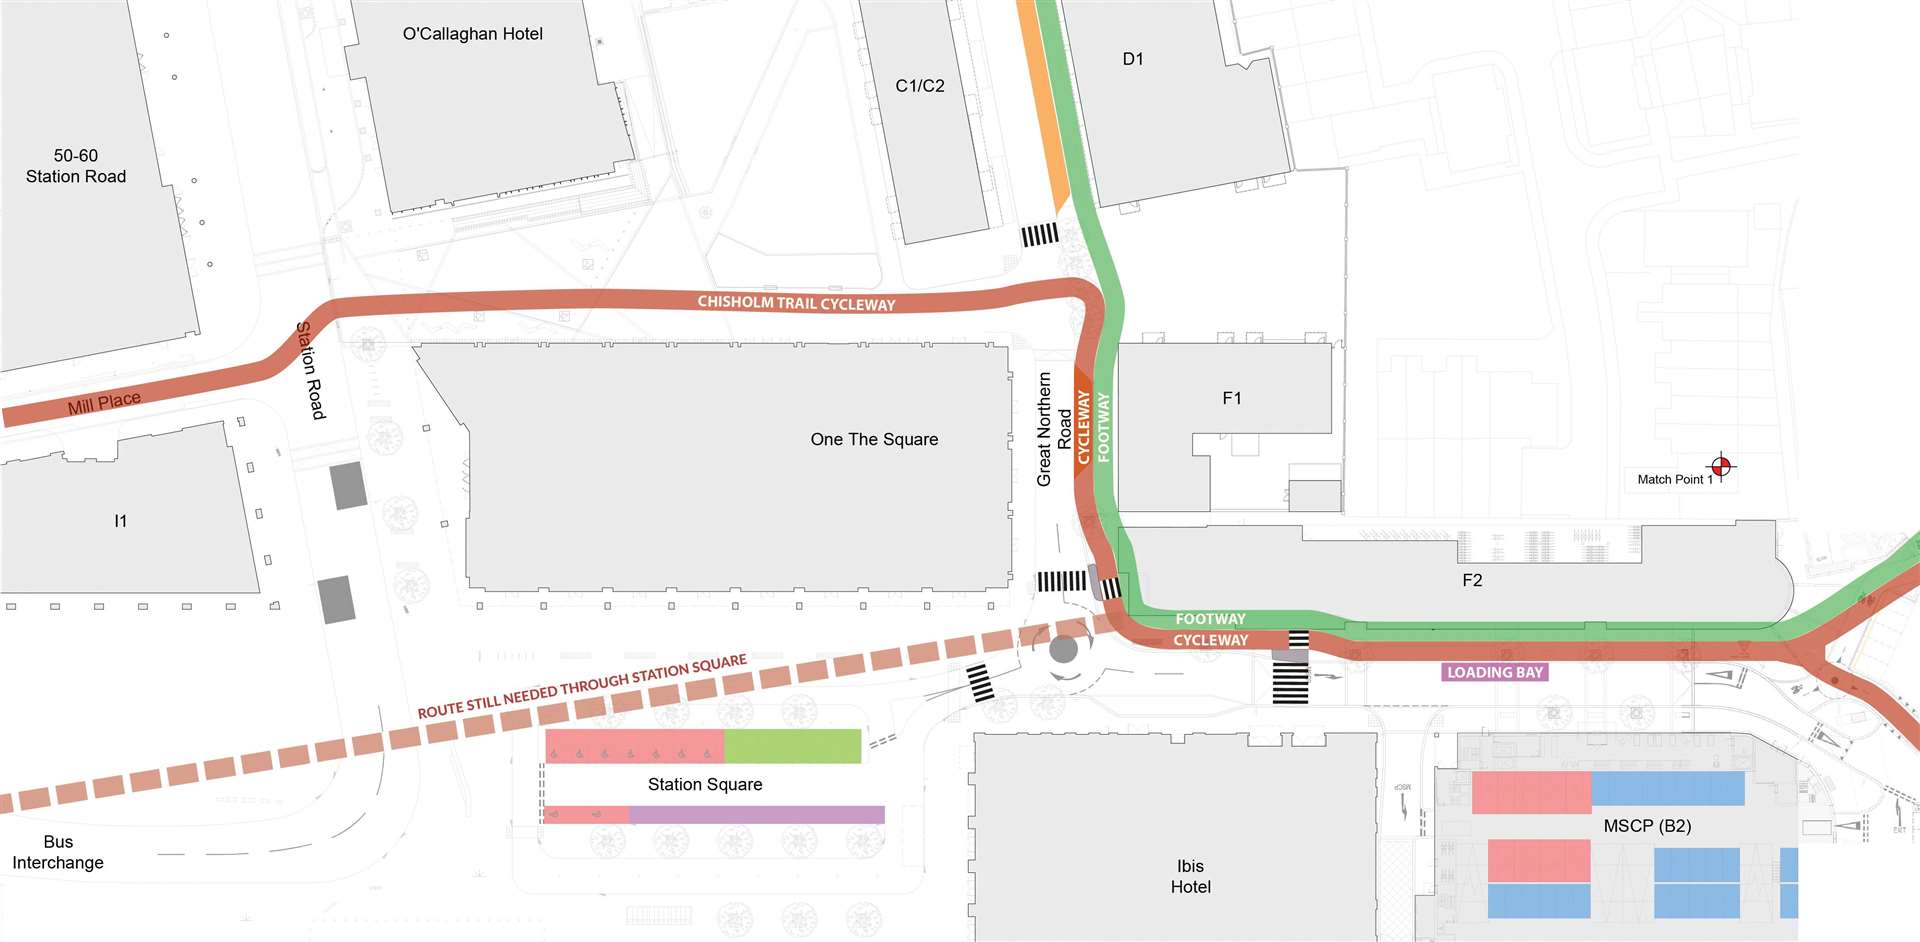 Smarter Cambridge Transport and Camcycle propose a cycle and walking route through the Devonshire Quarter that avoids the mini roundabout (42745804)